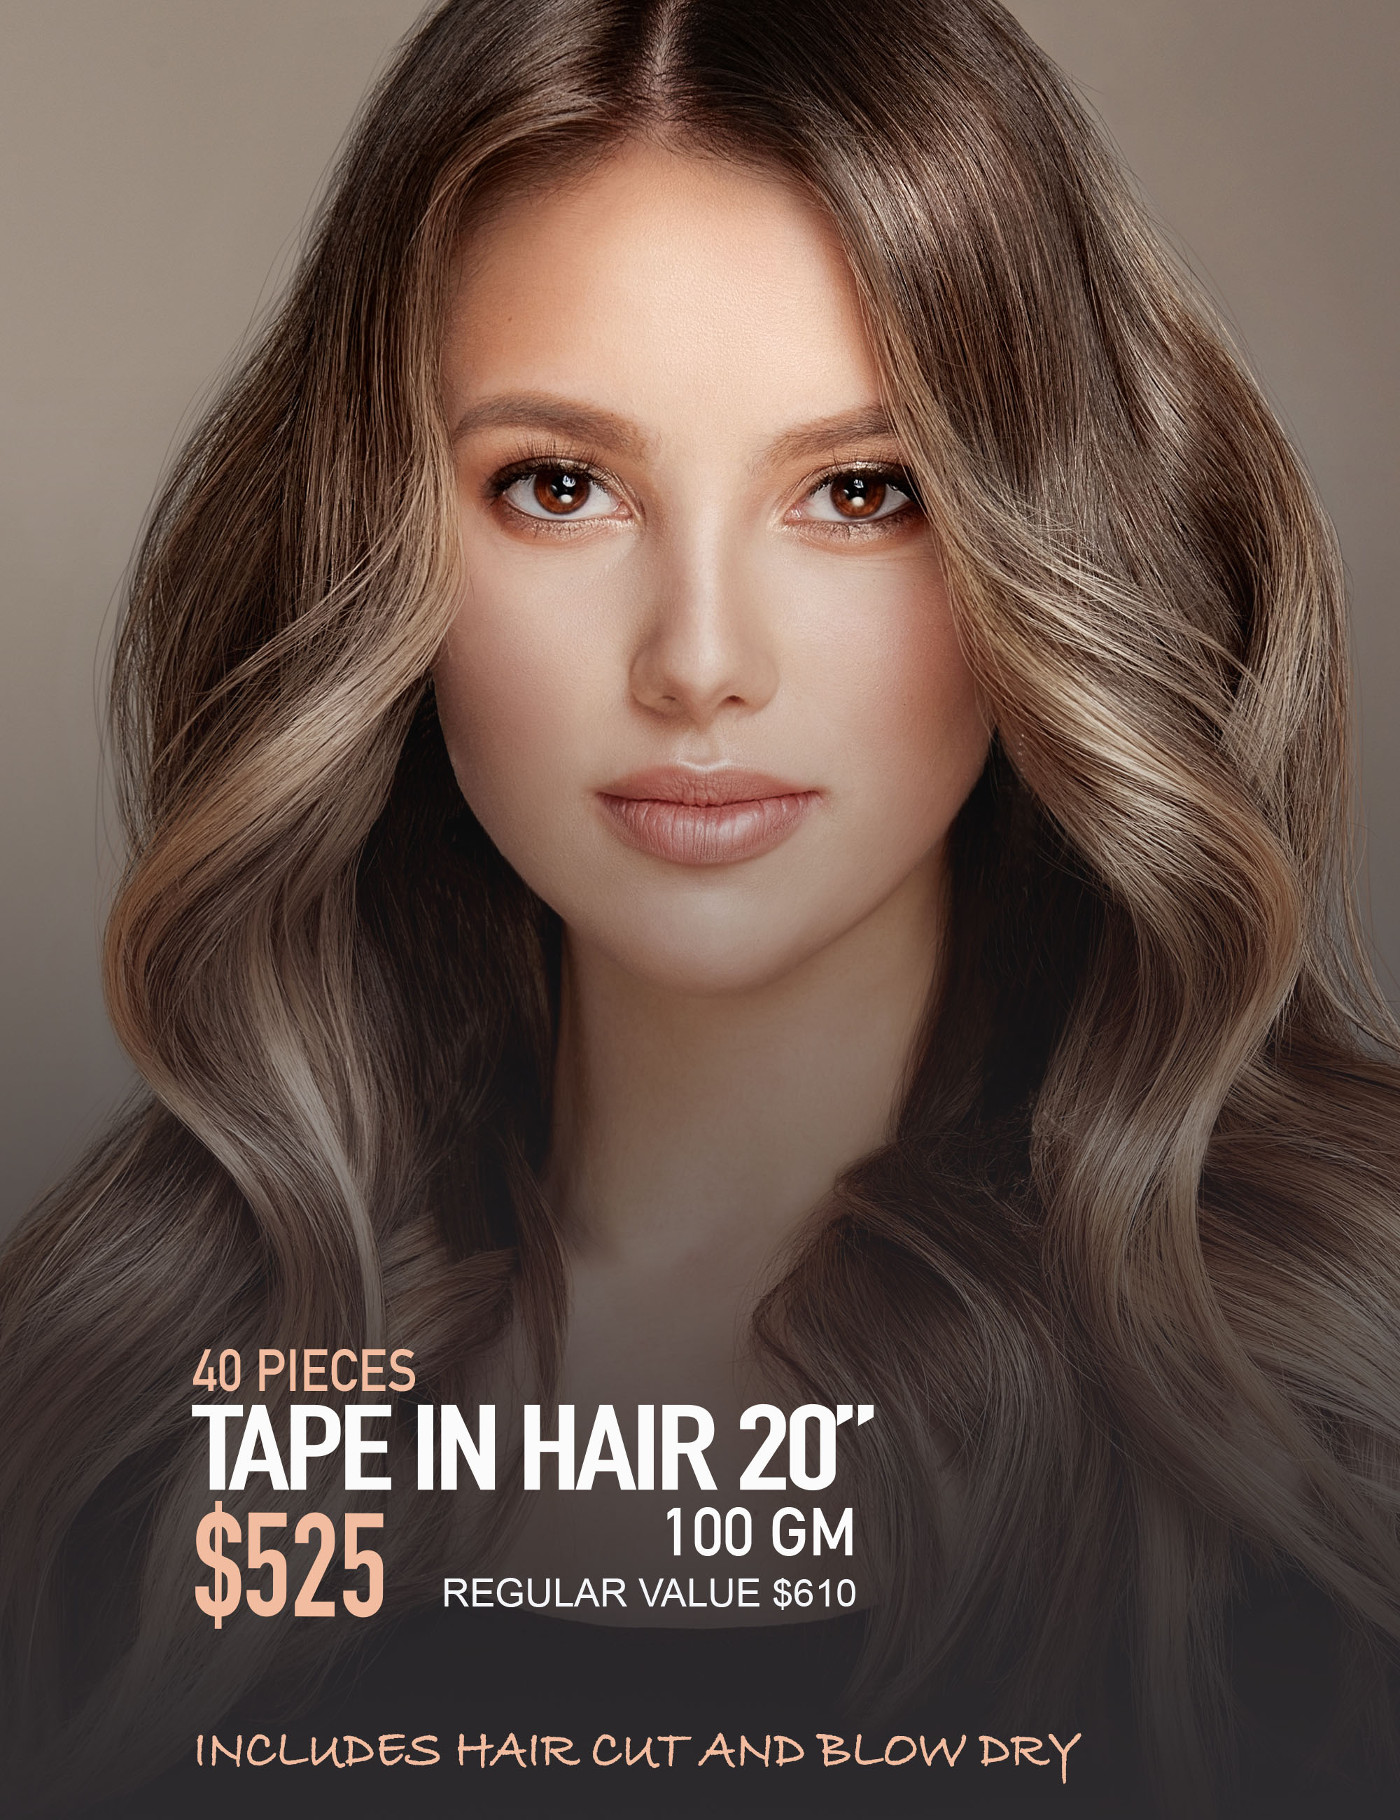 40 pieces tape hair Extensions, include hair cut and blow dry, please ask for our kit argan oil